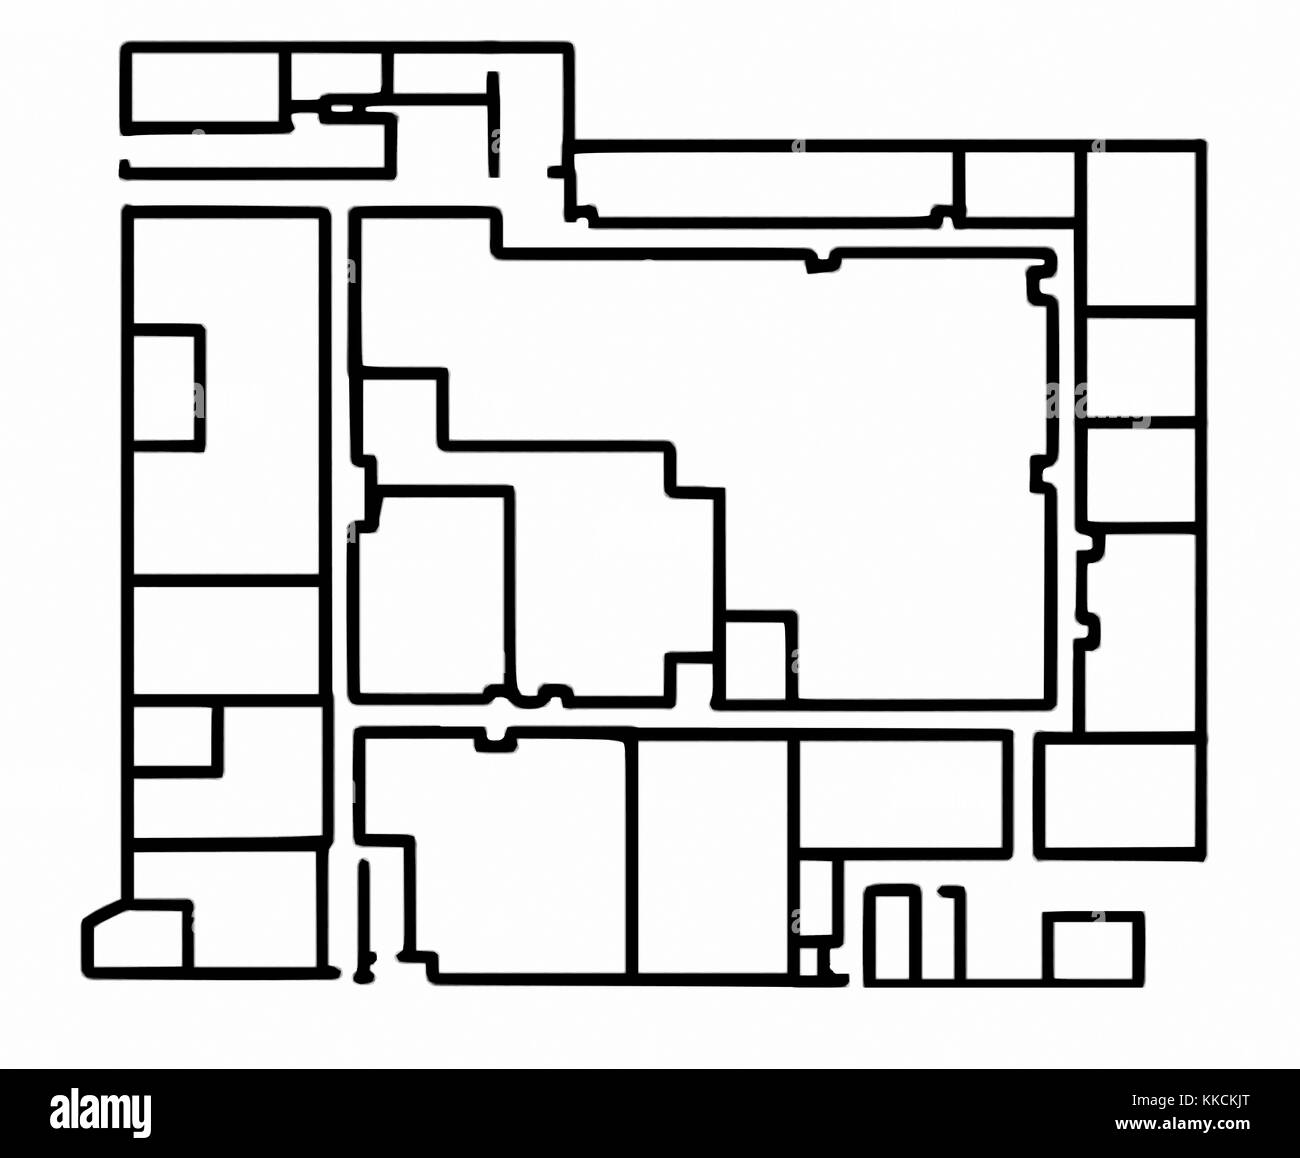 Floorplan for Engineering Building IV on the campus of the University of California Los Angeles (UCLA), site of alleged shooting of Professor William Klug by student Mainak Sarkar. Derived from a historical image; position of features and scale not exact. 2016. Stock Photo